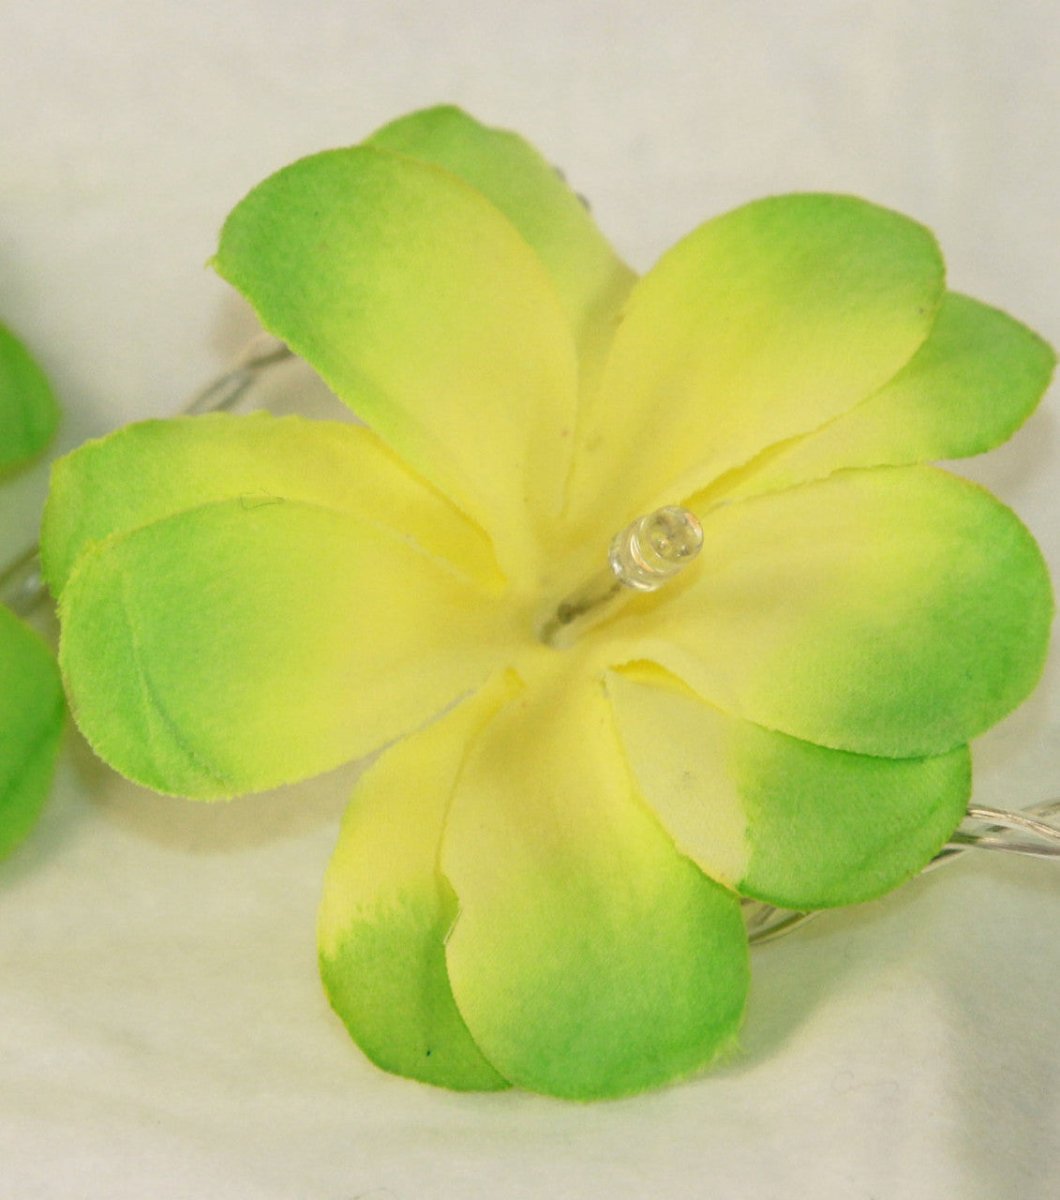 Set of 20 LED Green Frangipani Flower String Lights - Perfect for Christmas, Wedding &amp; Outdoor Decorations - Outdoorium